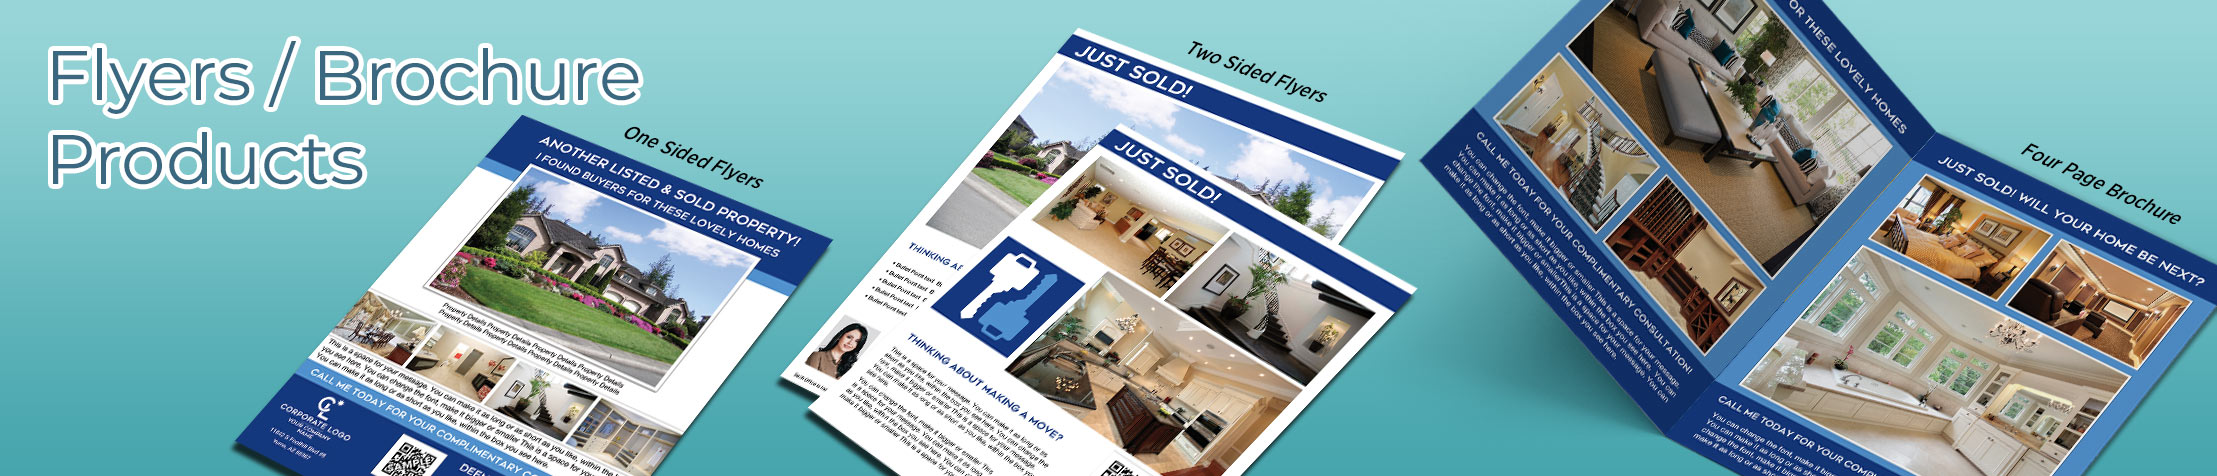 Coldwell Banker Real Estate Flyers and Brochures - Coldwell Banker flyer and brochure templates for open houses and marketing | BestPrintBuy.com